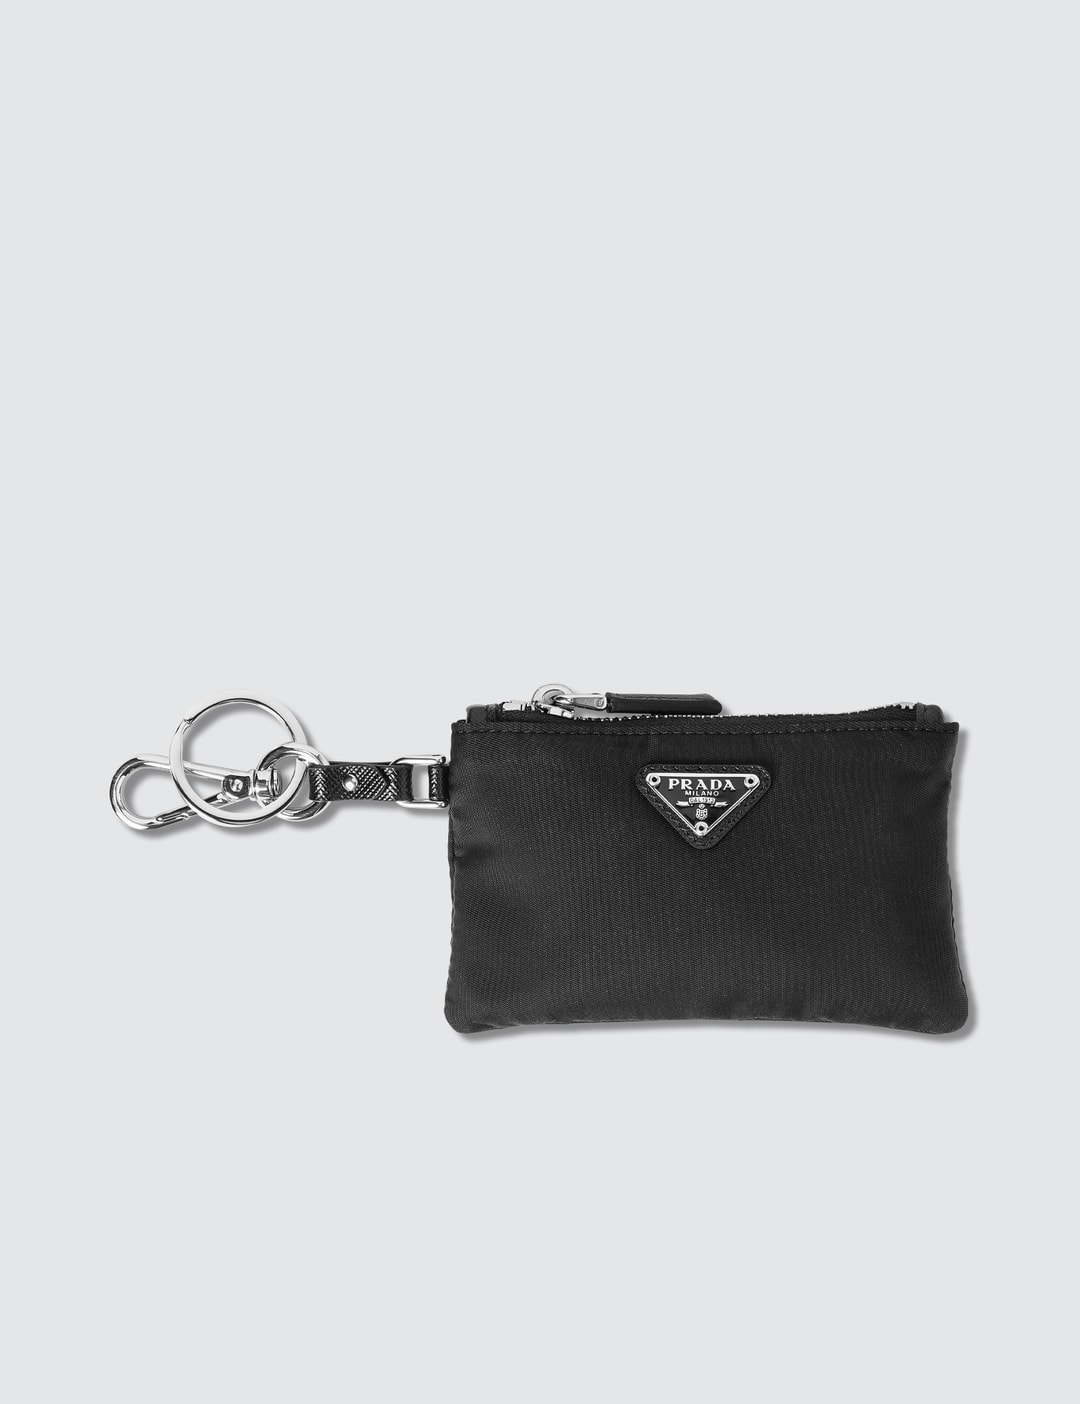 Prada - Saffiano Leather Keychain Trick | HBX - Globally Curated Fashion  and Lifestyle by Hypebeast